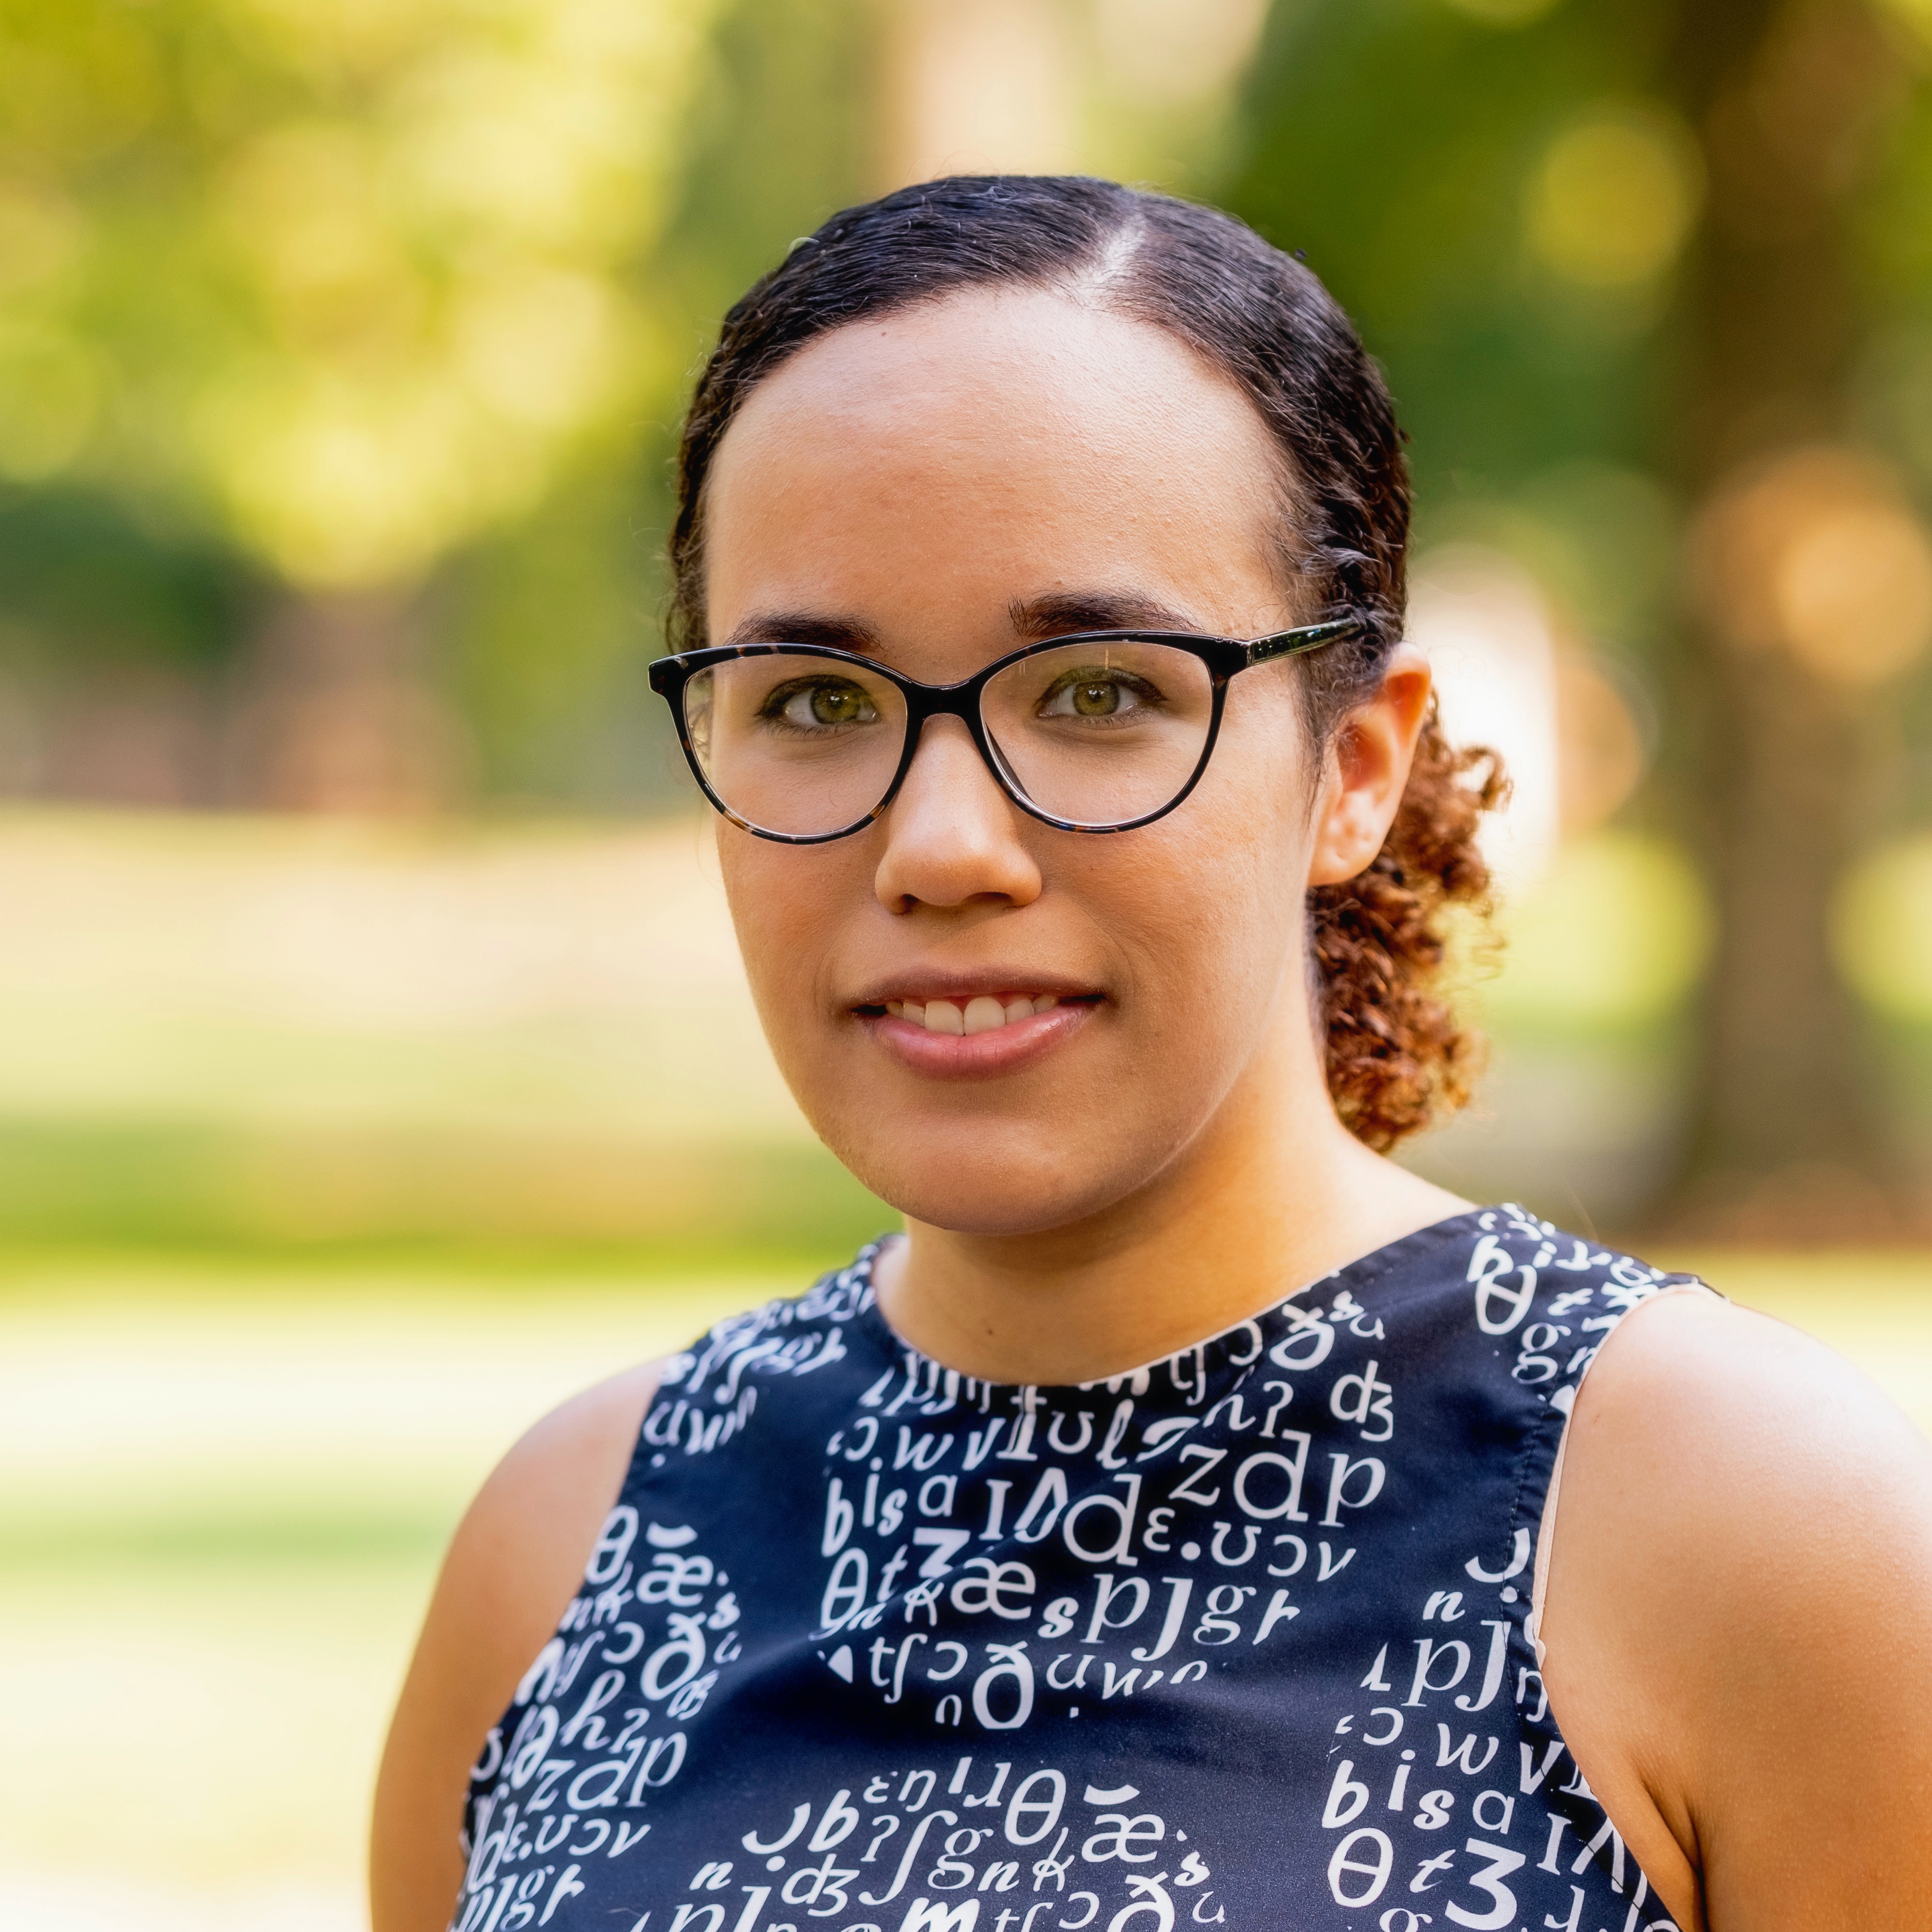 We are excited to have Jamilläh Rodriguez join the department as an Assistant Professor!